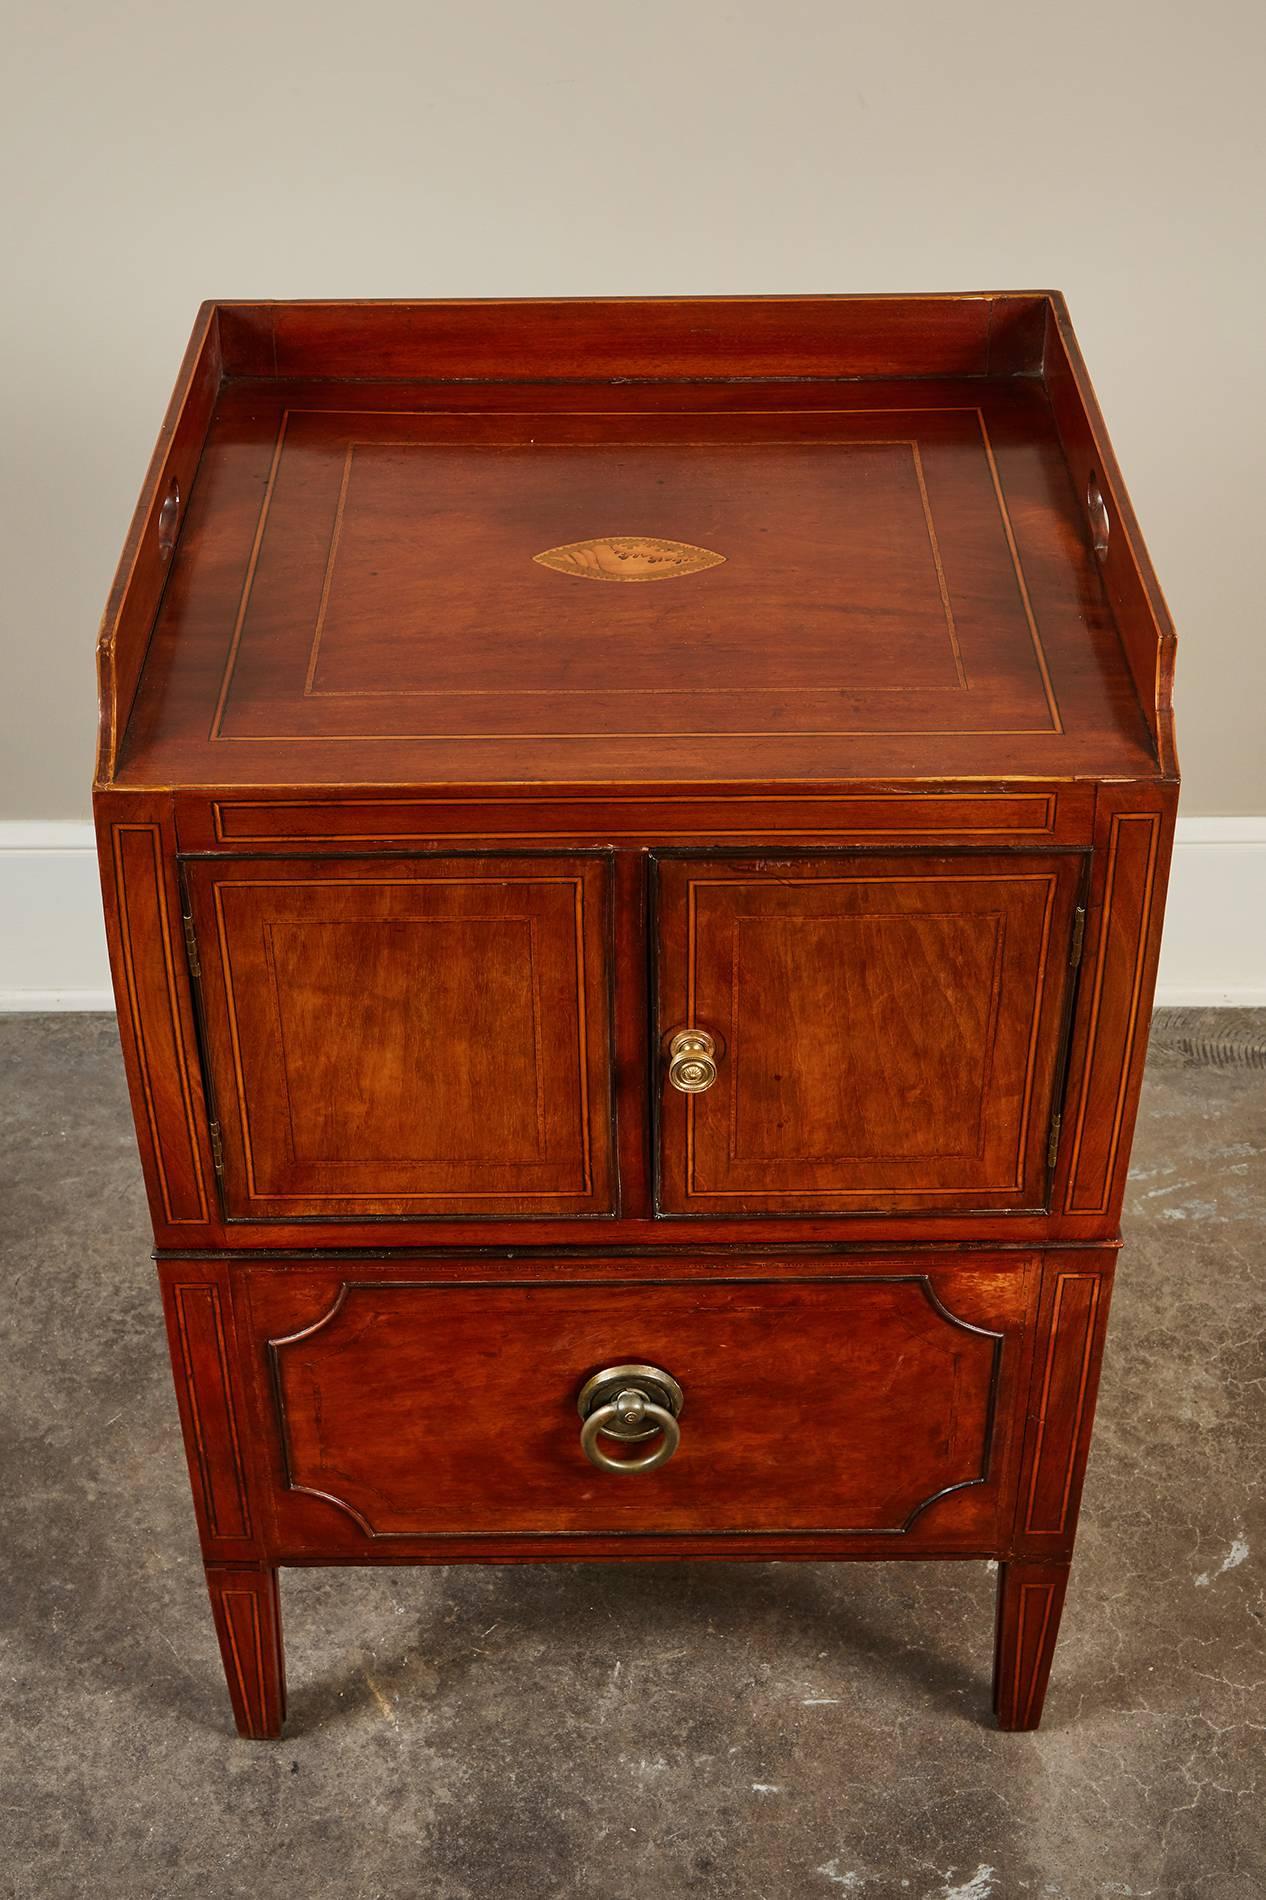 An 18th century English Georgian mahogany bedside commode table featuring inlay on the top of a center shell emblem, and consists of one drawer and two doors.